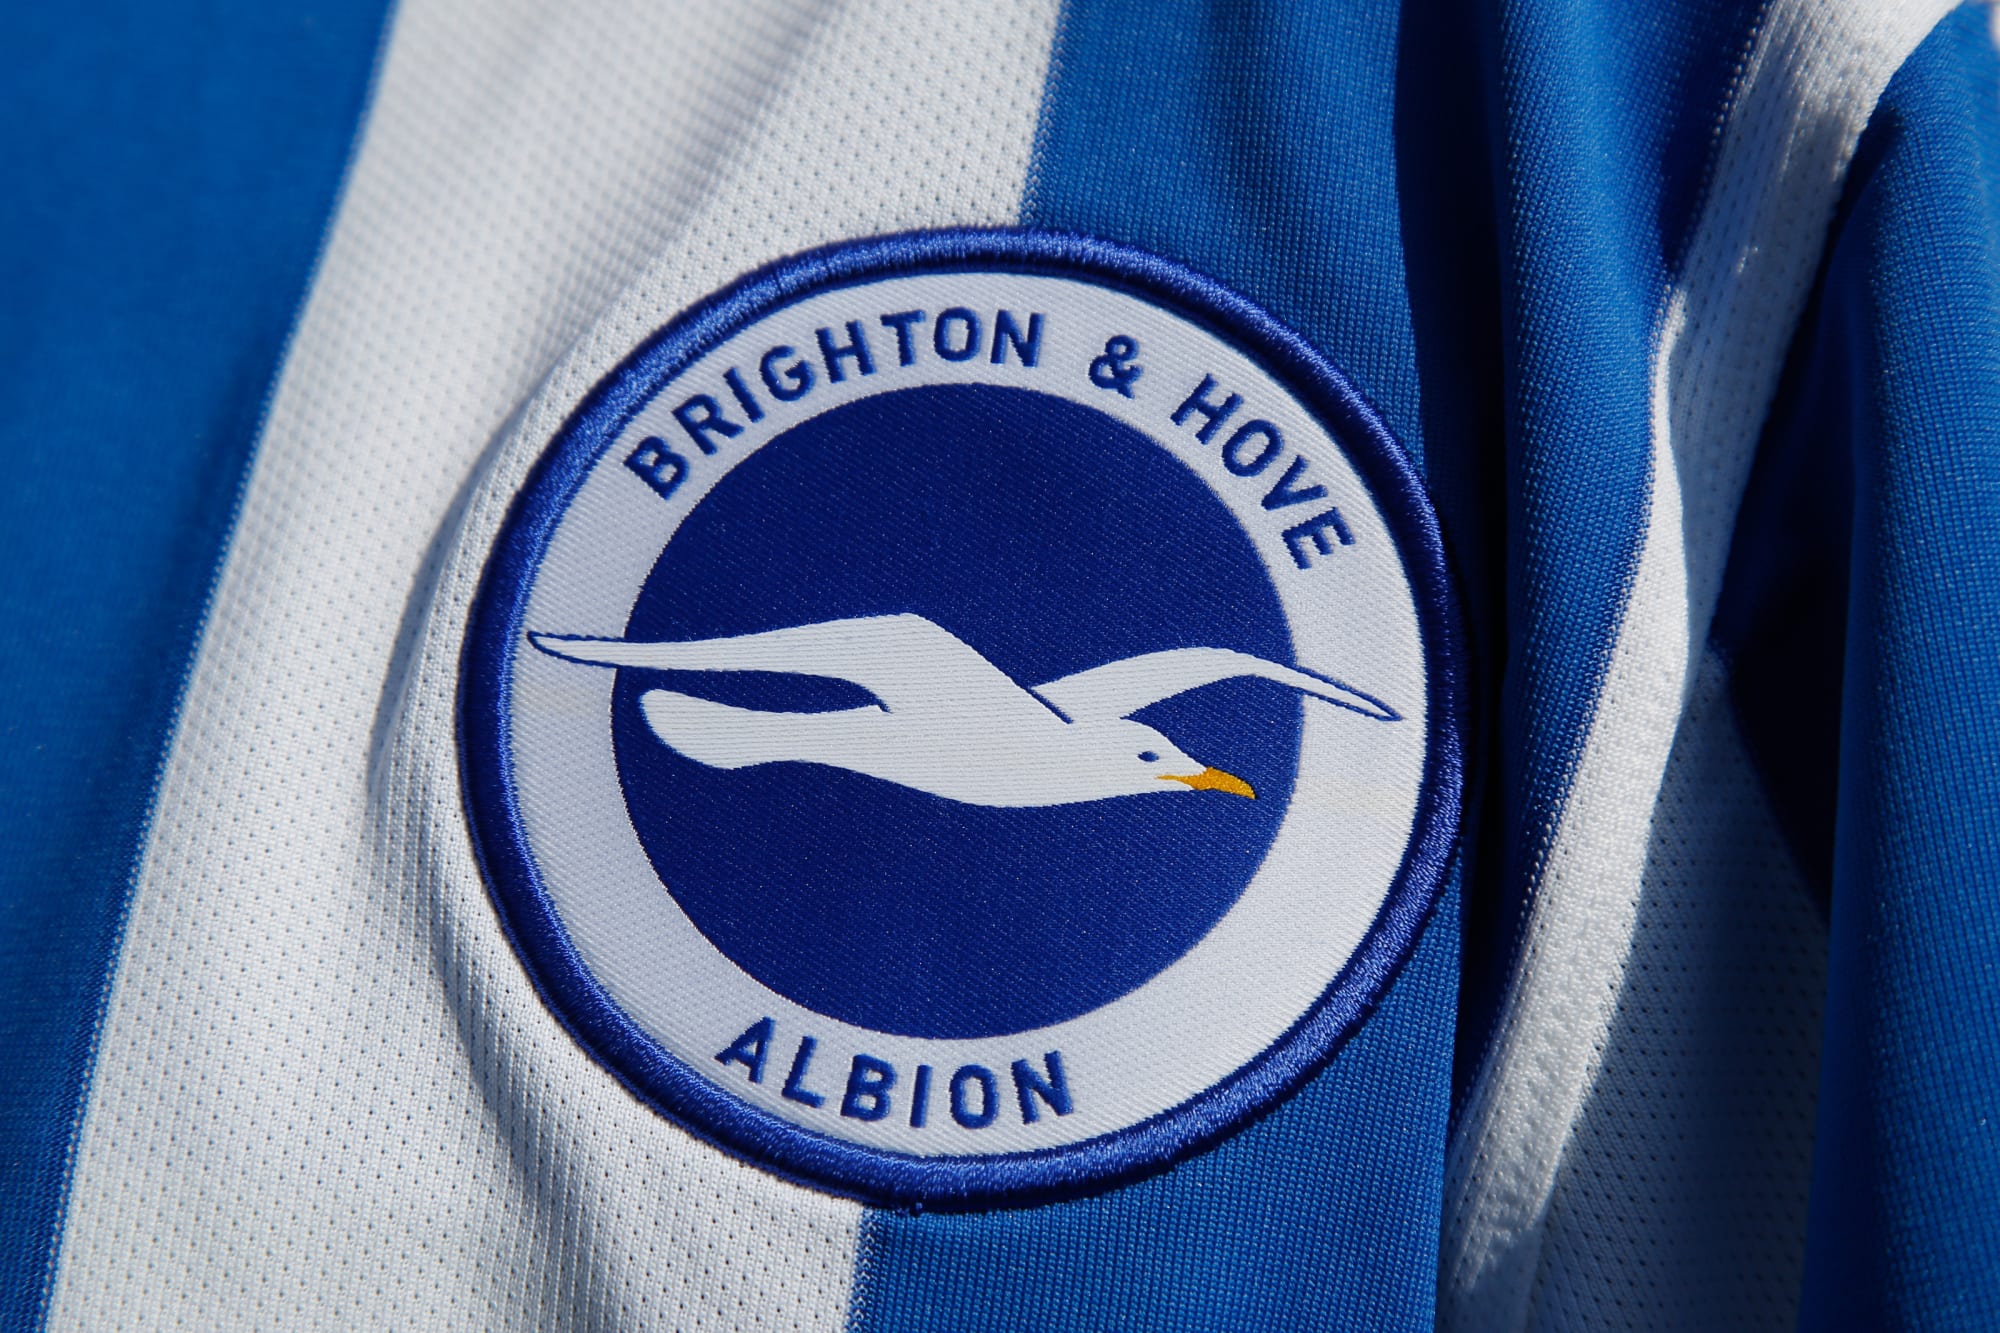 BBC reporte: two superstar news and return dates ahead of the Brighton Cup match….